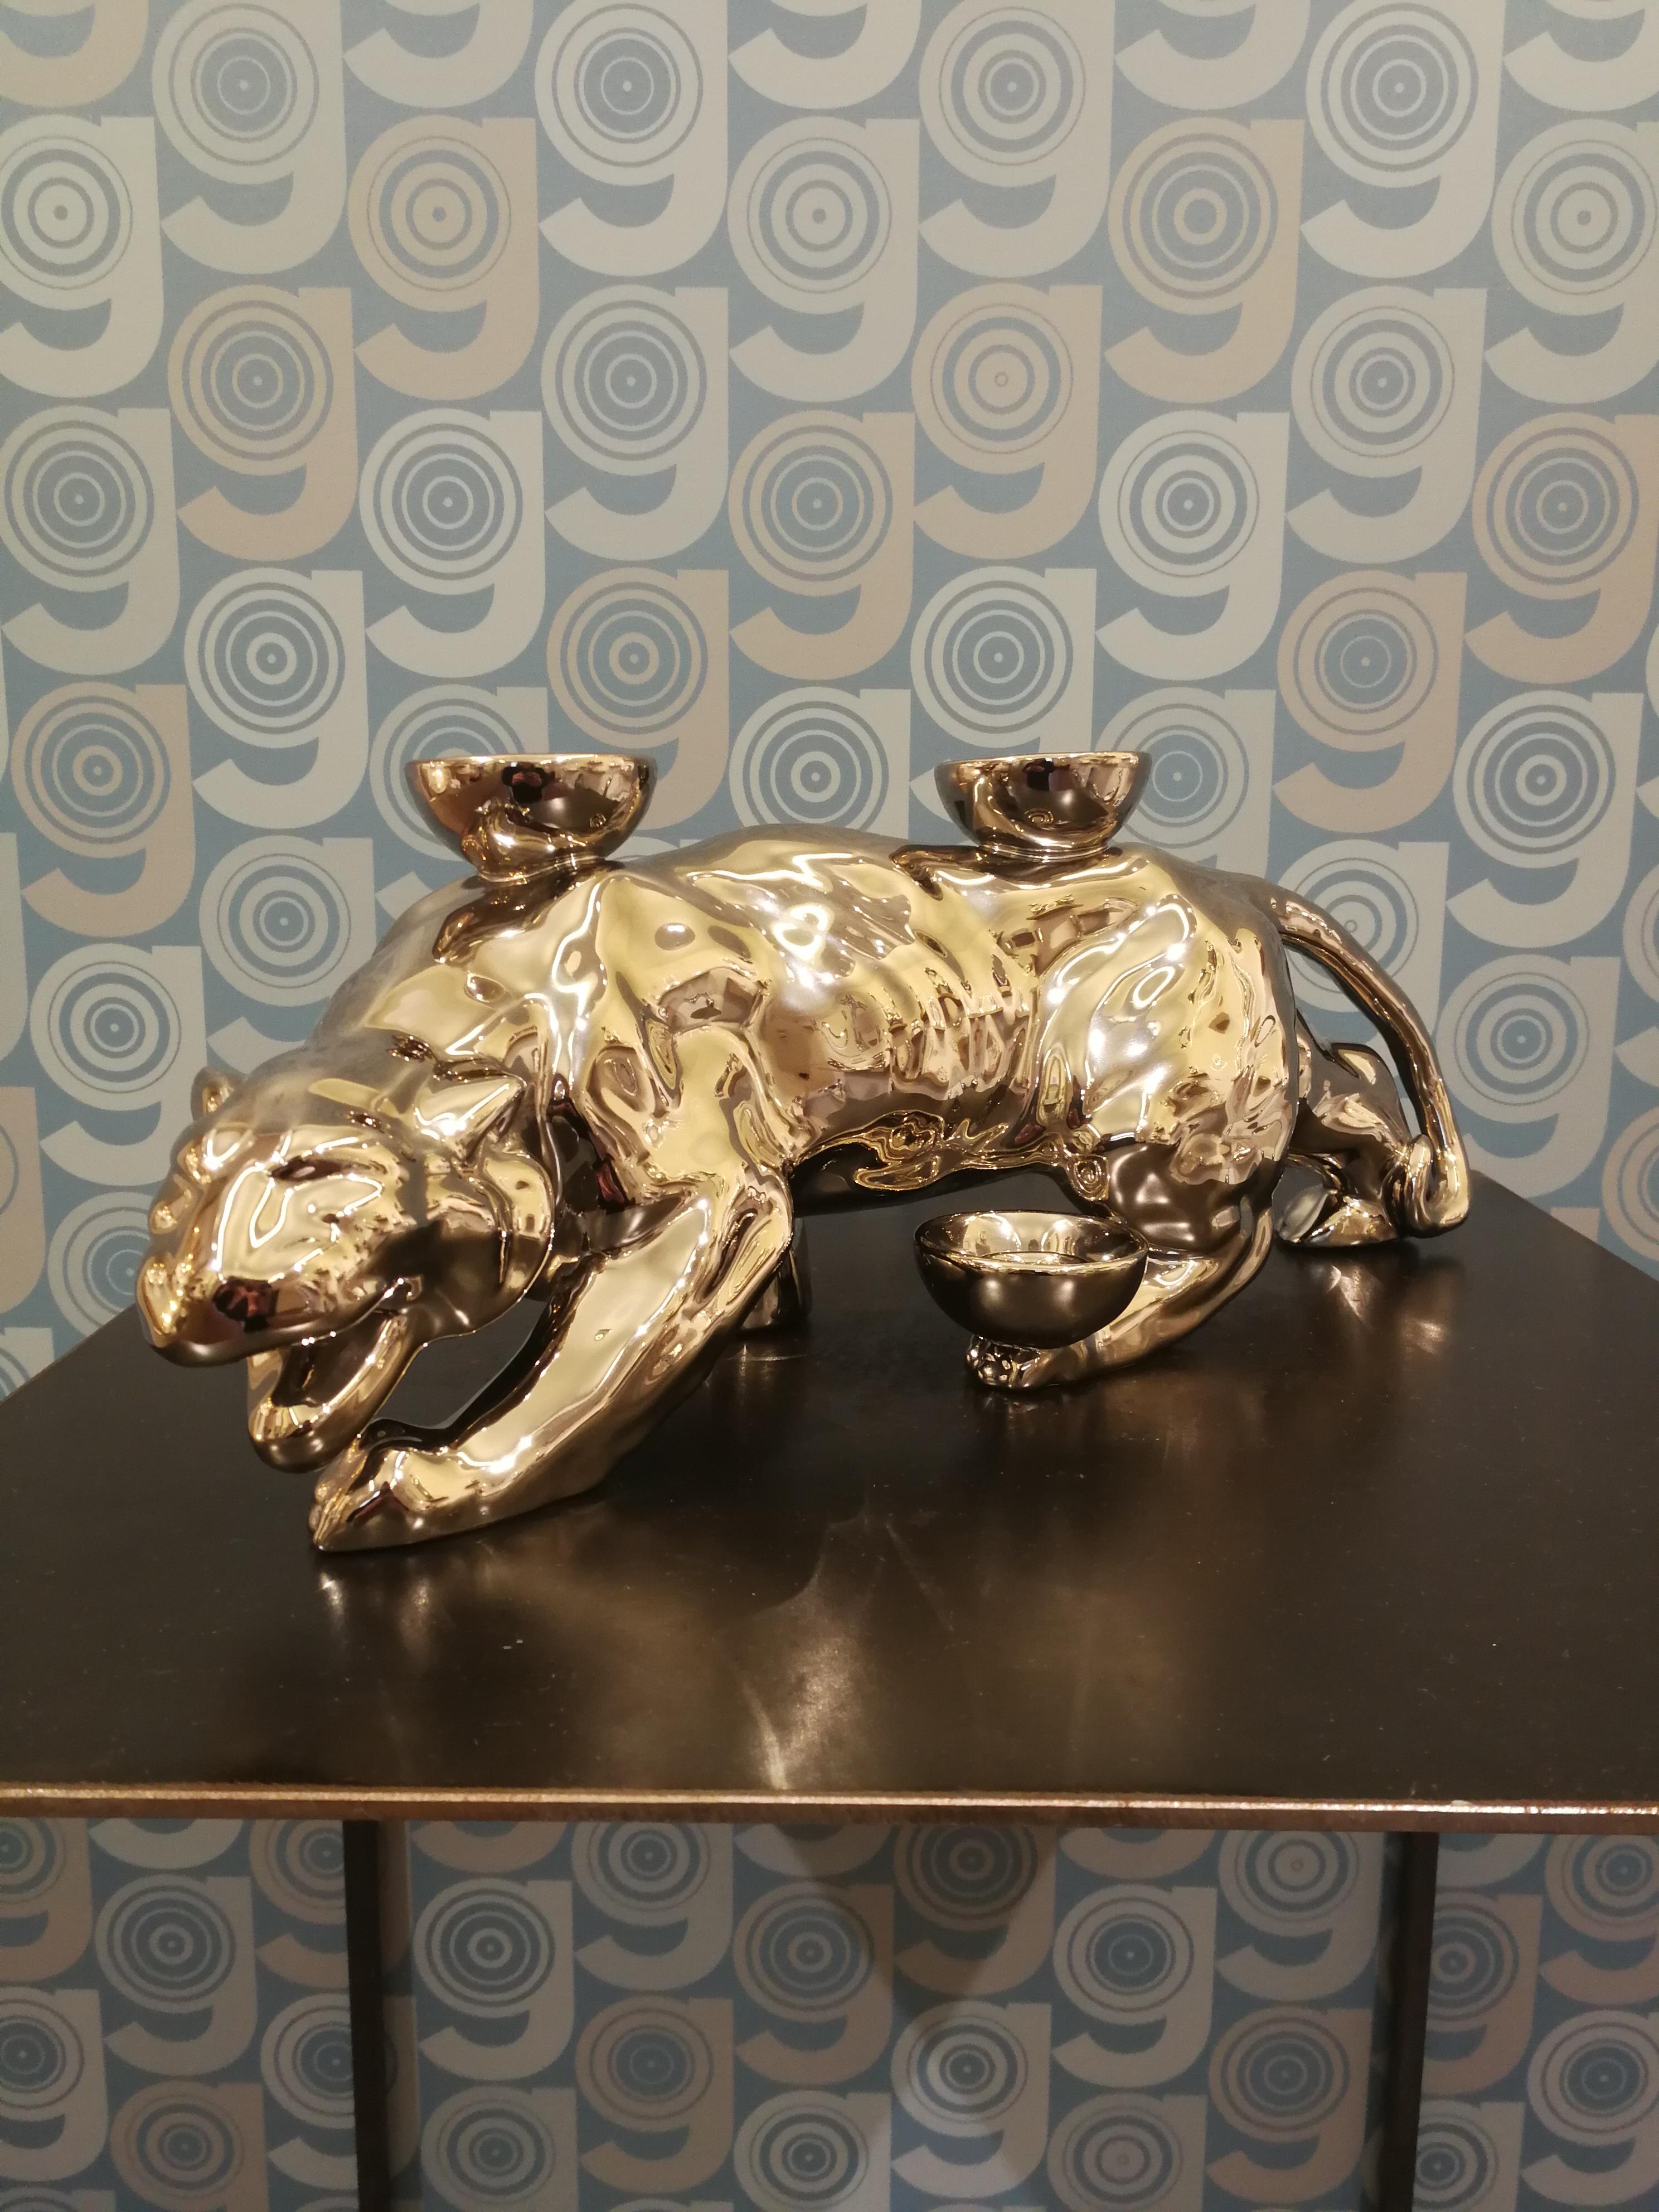 This panther is part of an original collection of candle holder animals. The realization of the shape takes place through a mold with liquid clay; tiled and hand painted in a vast range of colours, from the most delicate pastels to the more